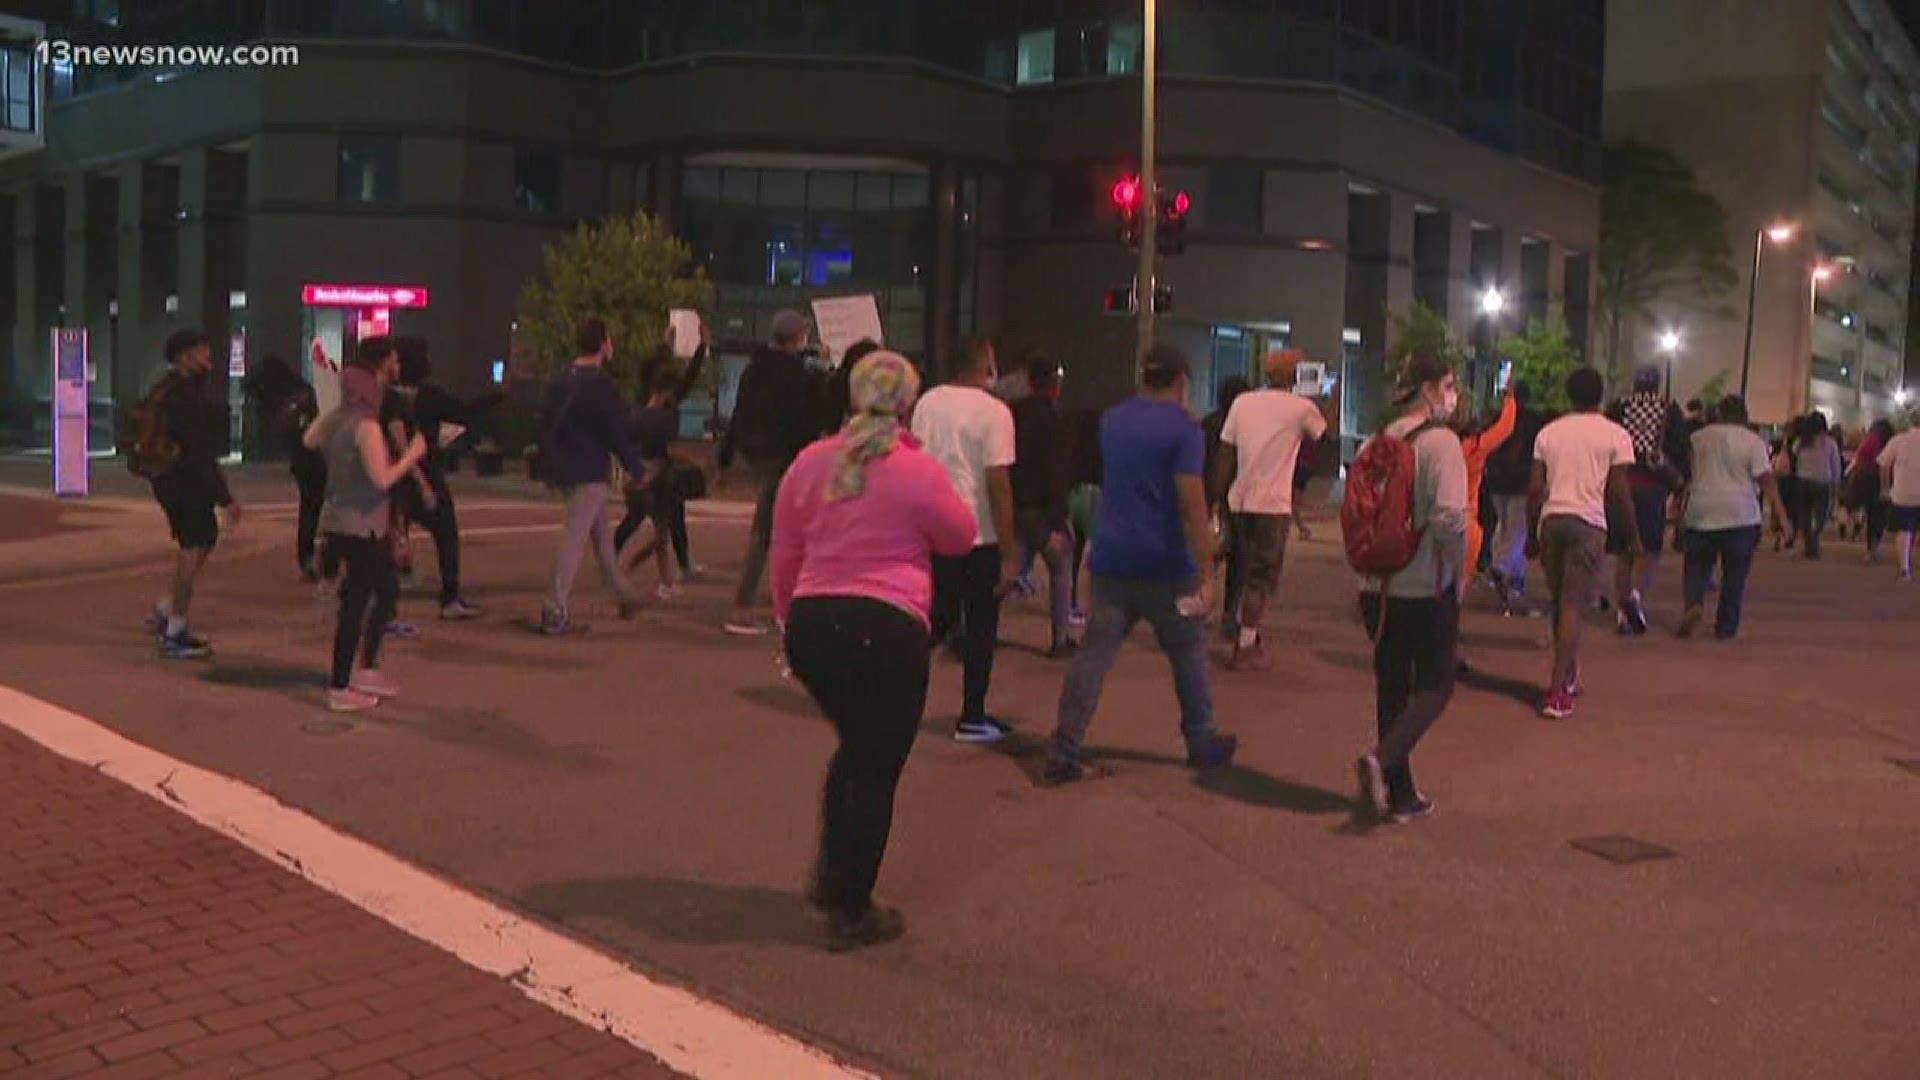 Hundreds of protesters in Norfolk marched throughout the city Tuesdat night, calling for justice and reform.